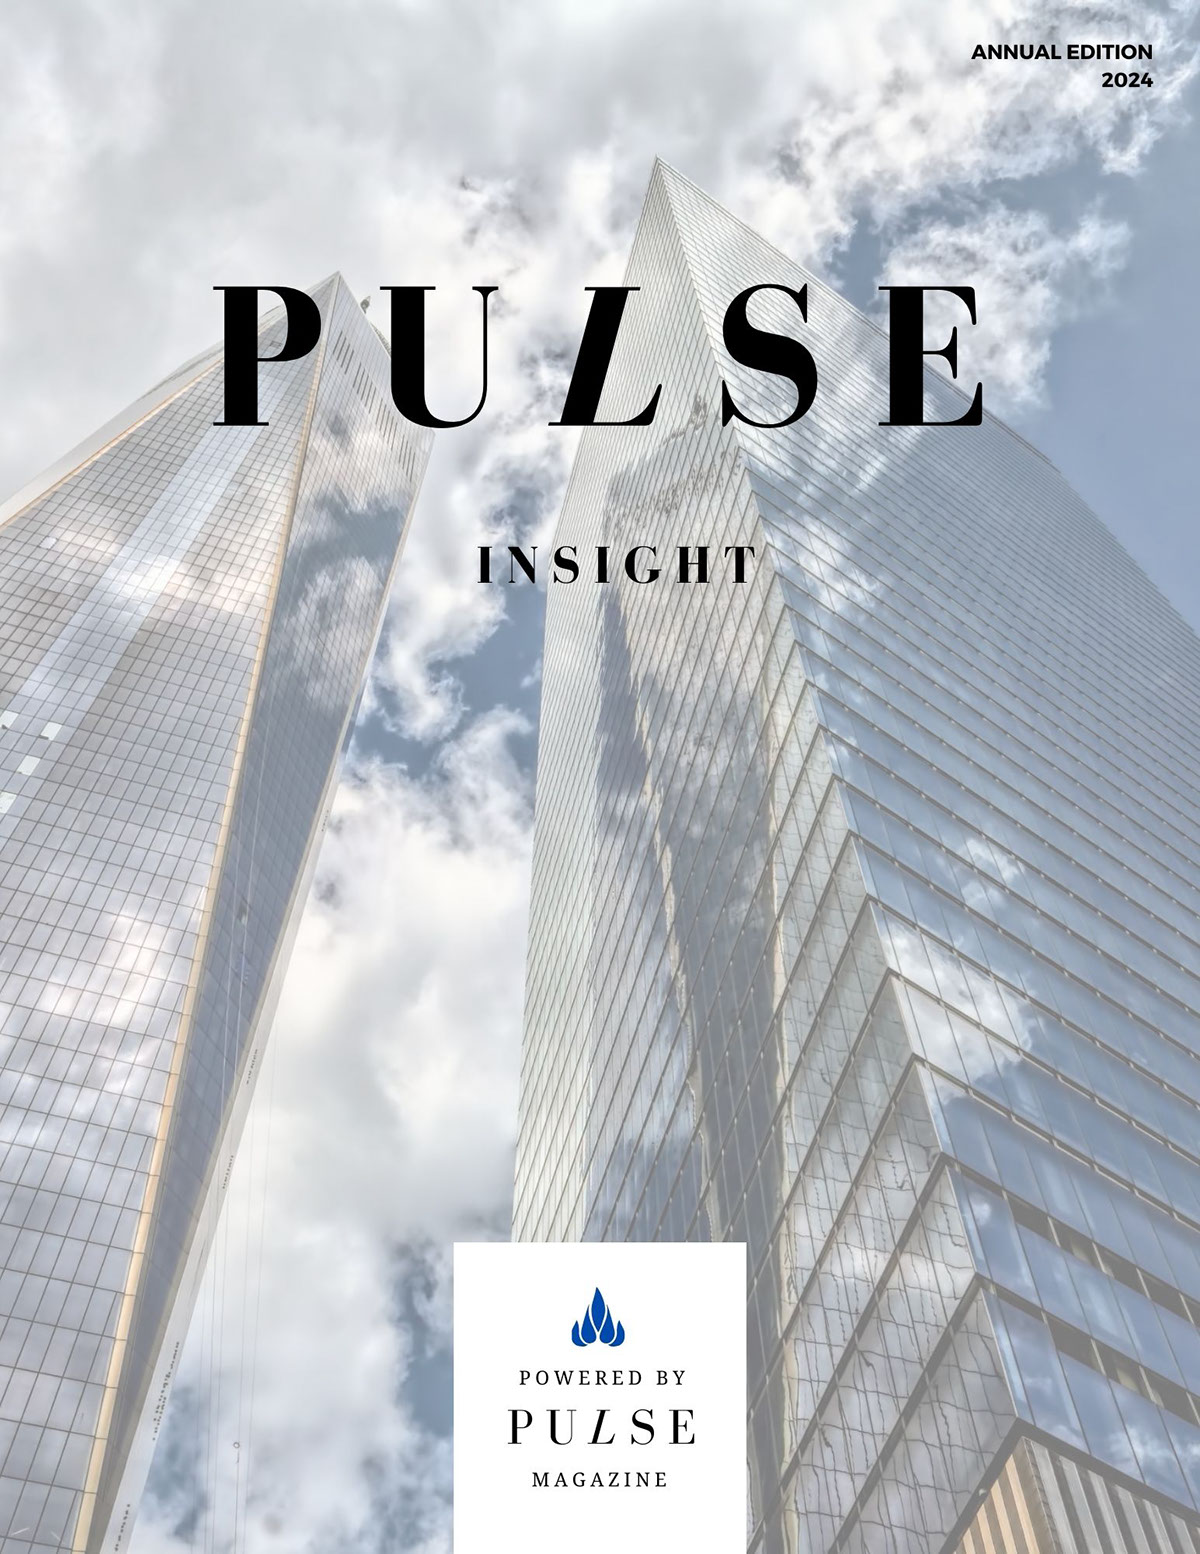 PULSE INSIGHT rendition image